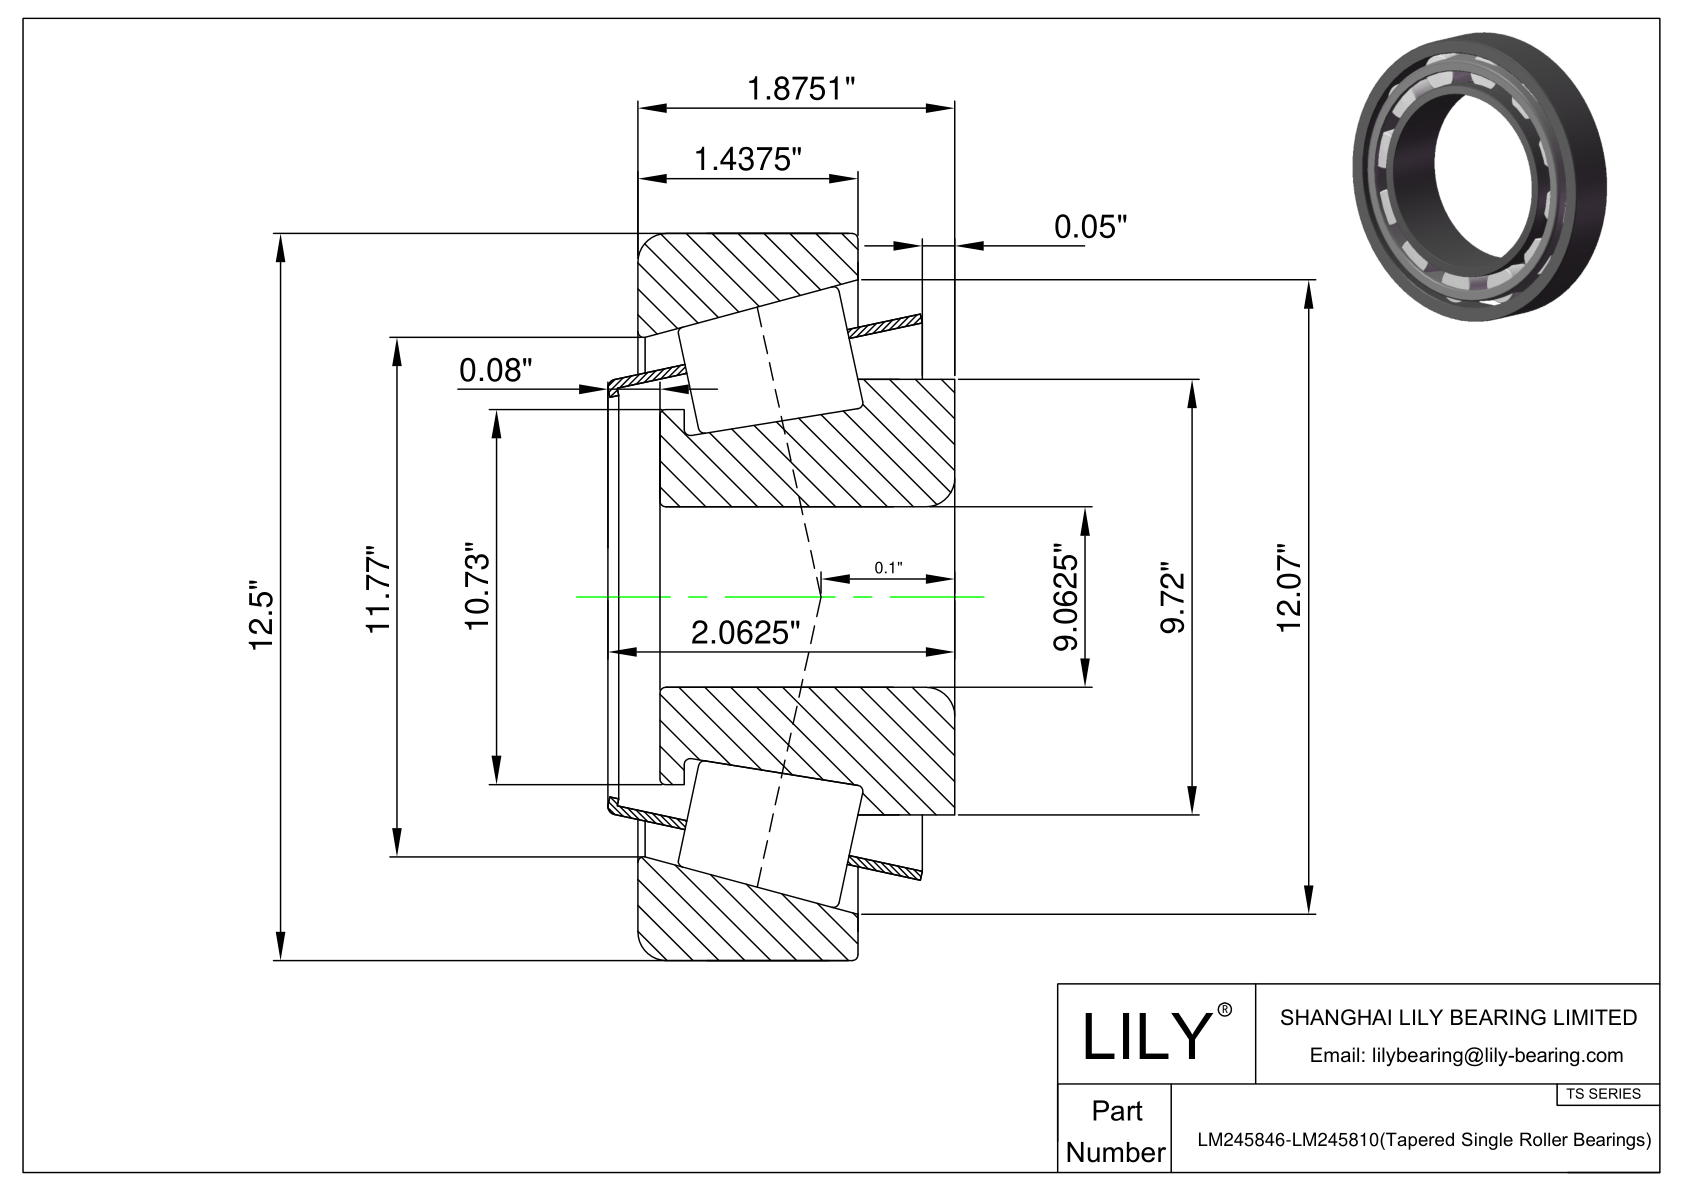 LM245846-LM245810 TS (Tapered Single Roller Bearings) (Imperial) cad drawing